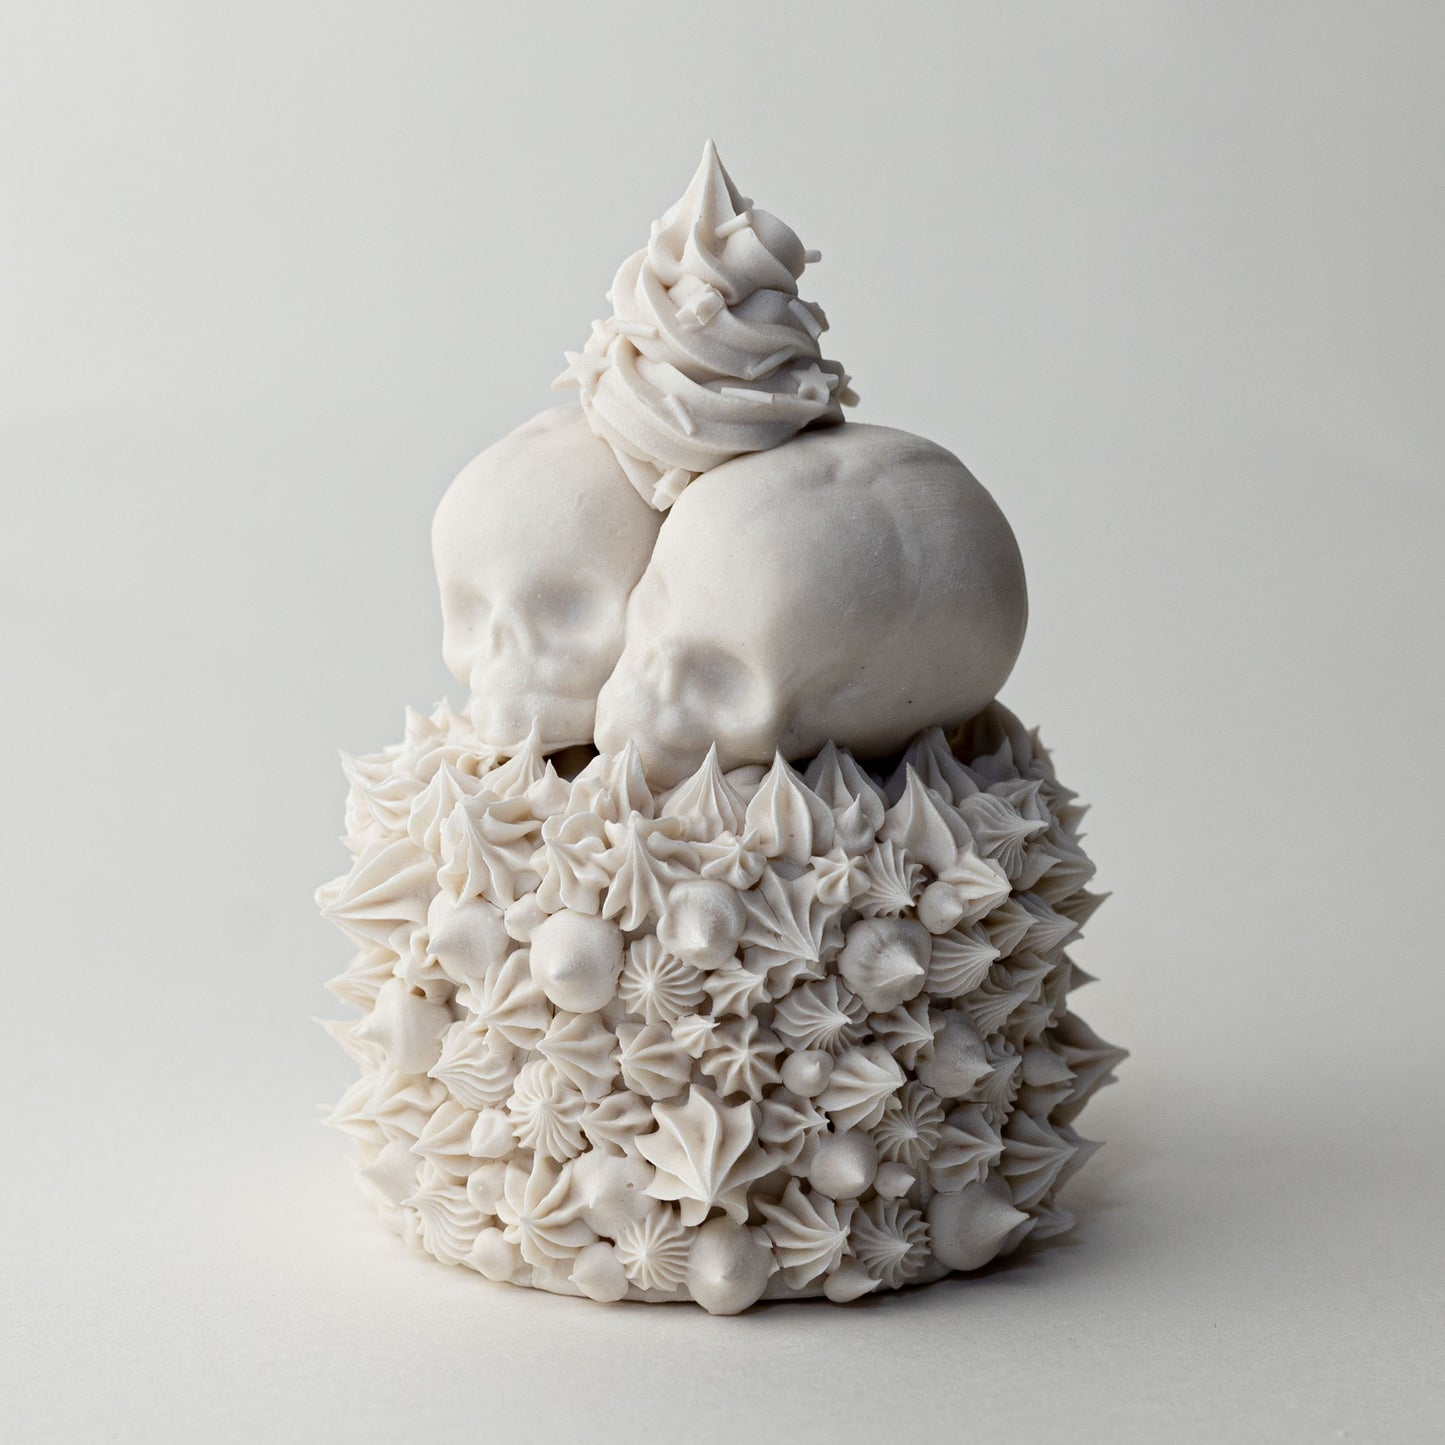 Swirl Twin Cake (One of a Kind Porcelain Sculpture)